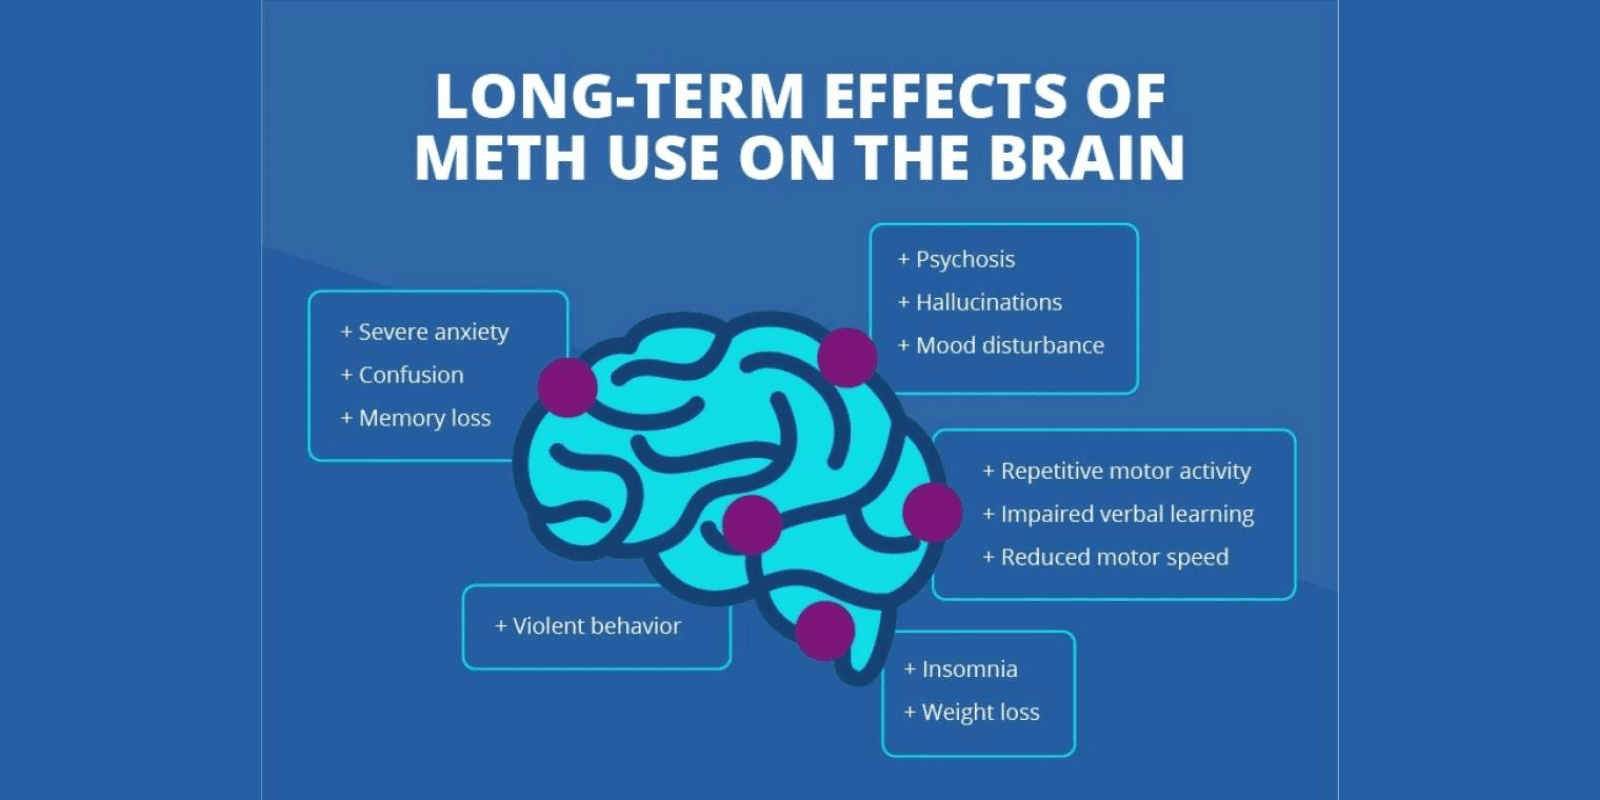 Long term effects of meth use on the brain laid out in more visually appealing way